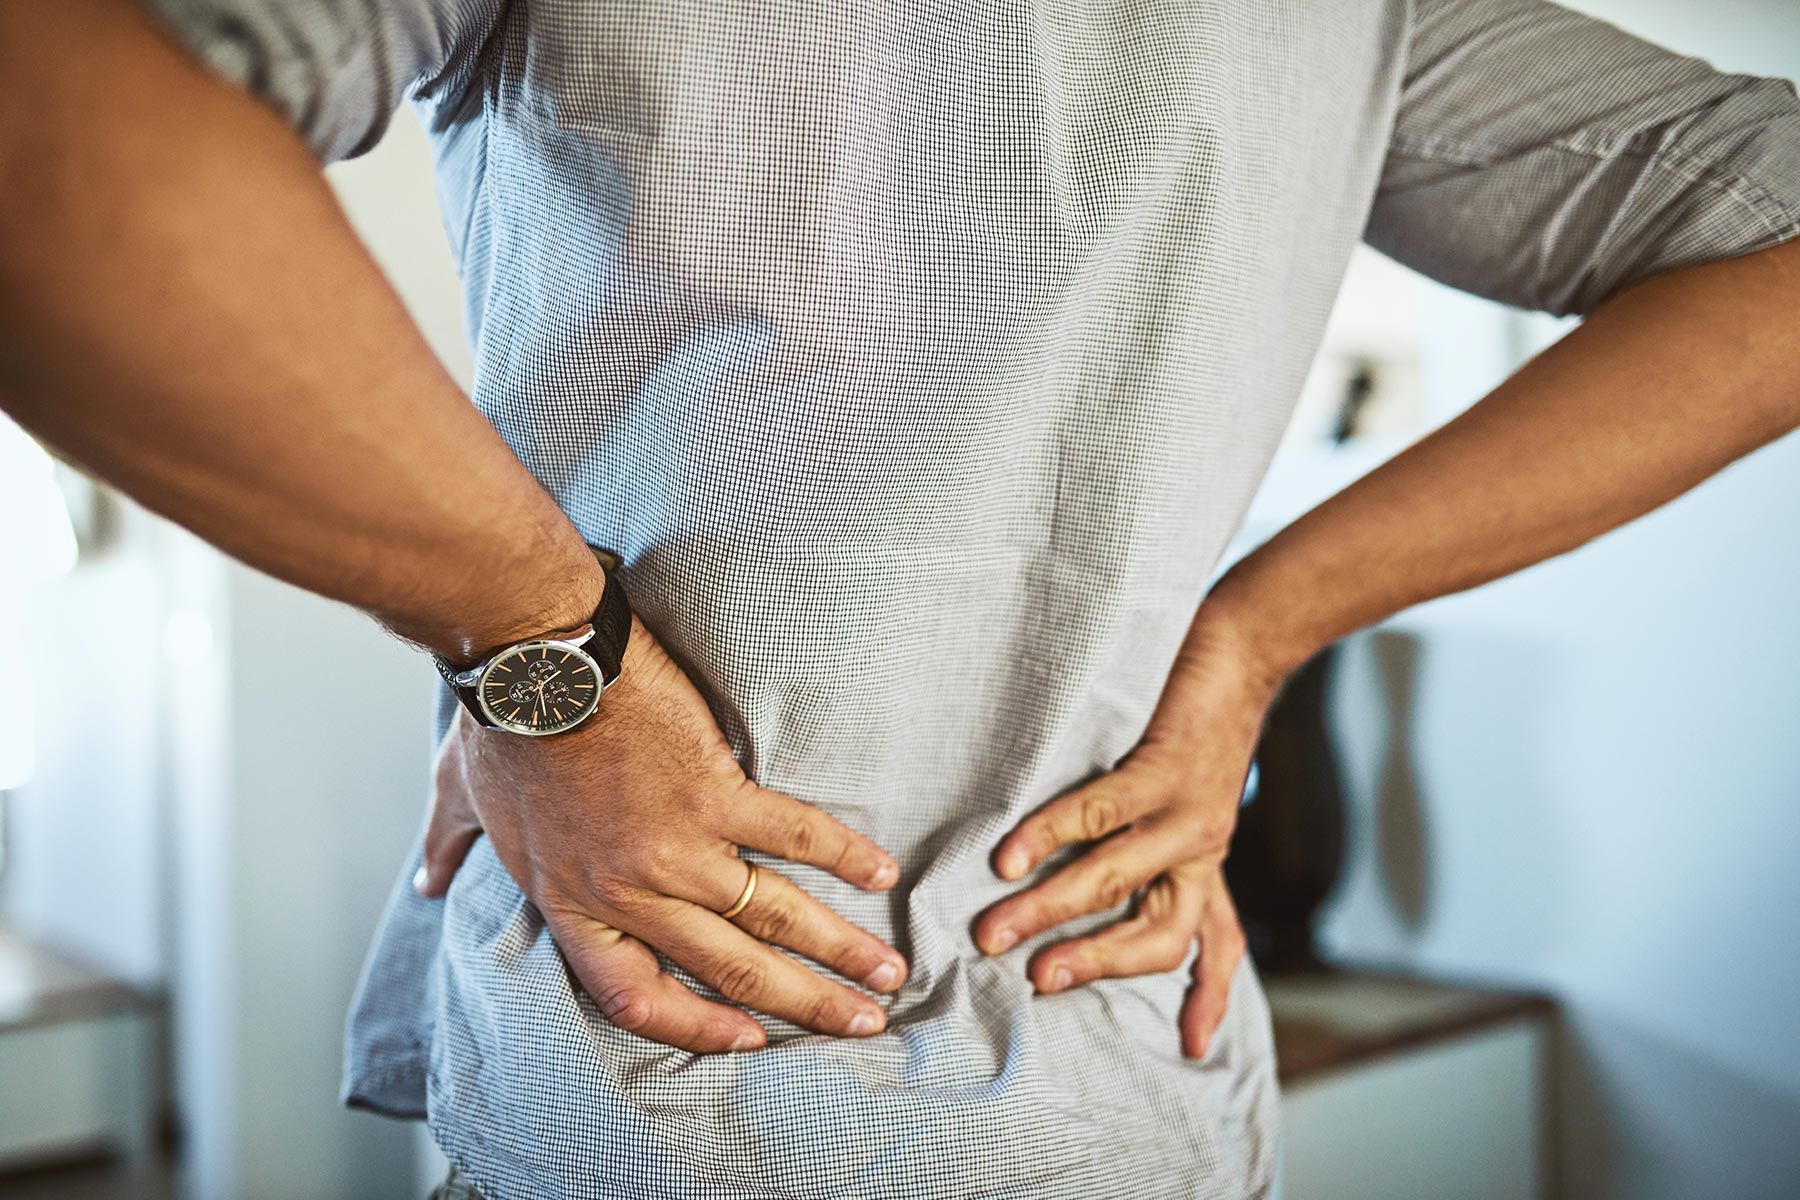 No Evidence Muscle Relaxers Ease Low Back Pain